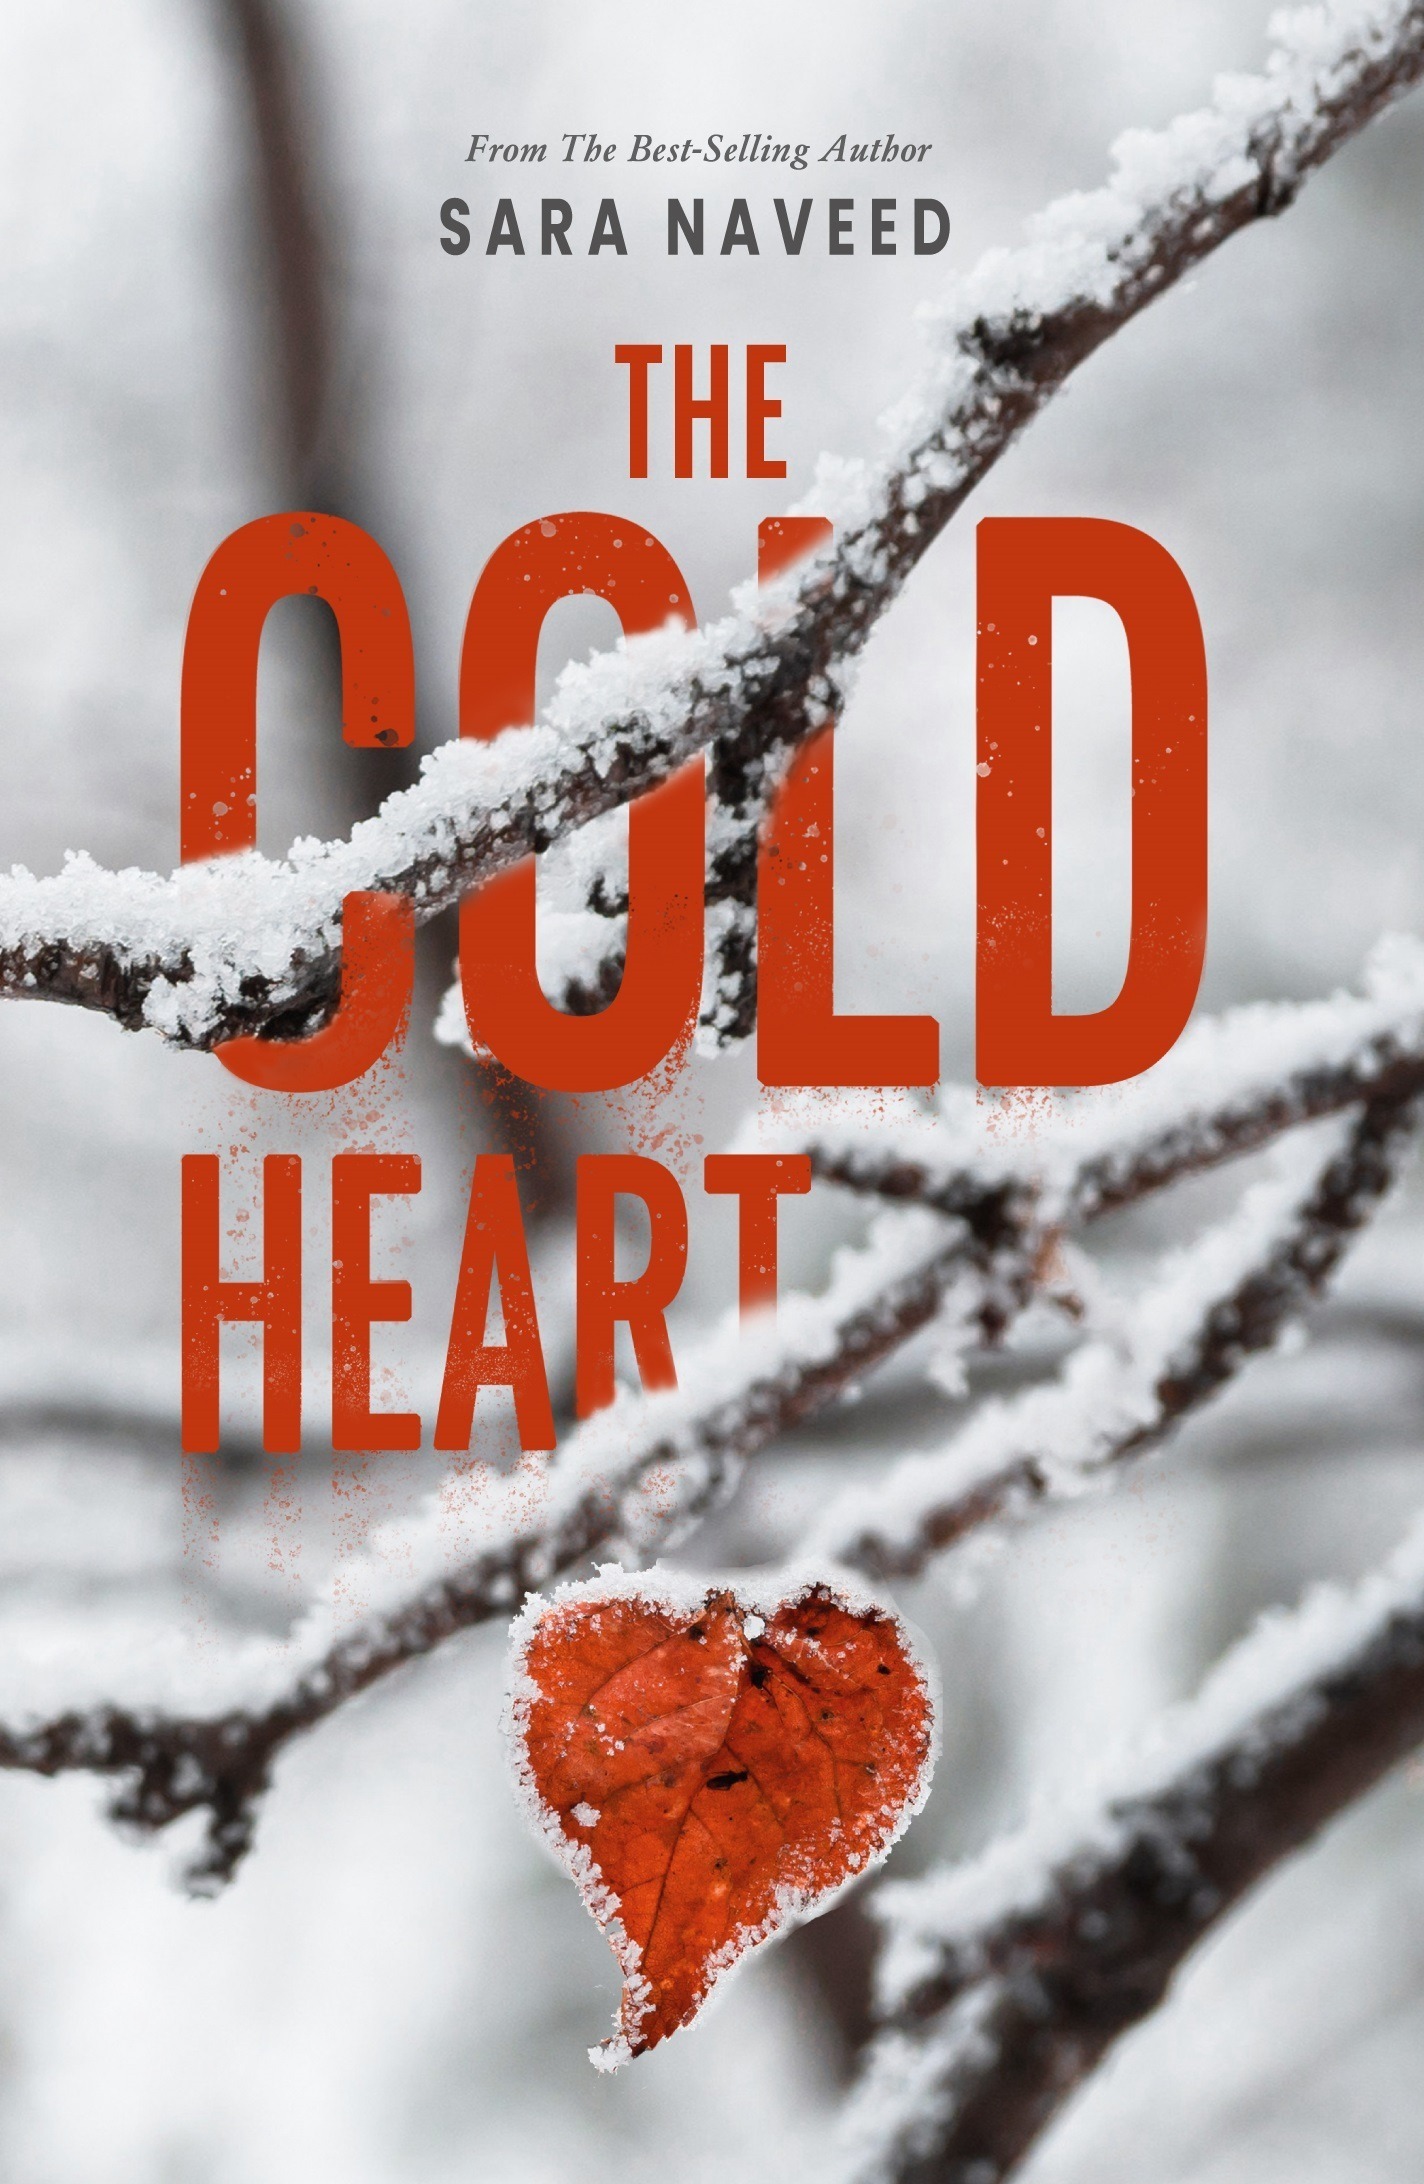 THE COLD HEART BY SARA NAVEED